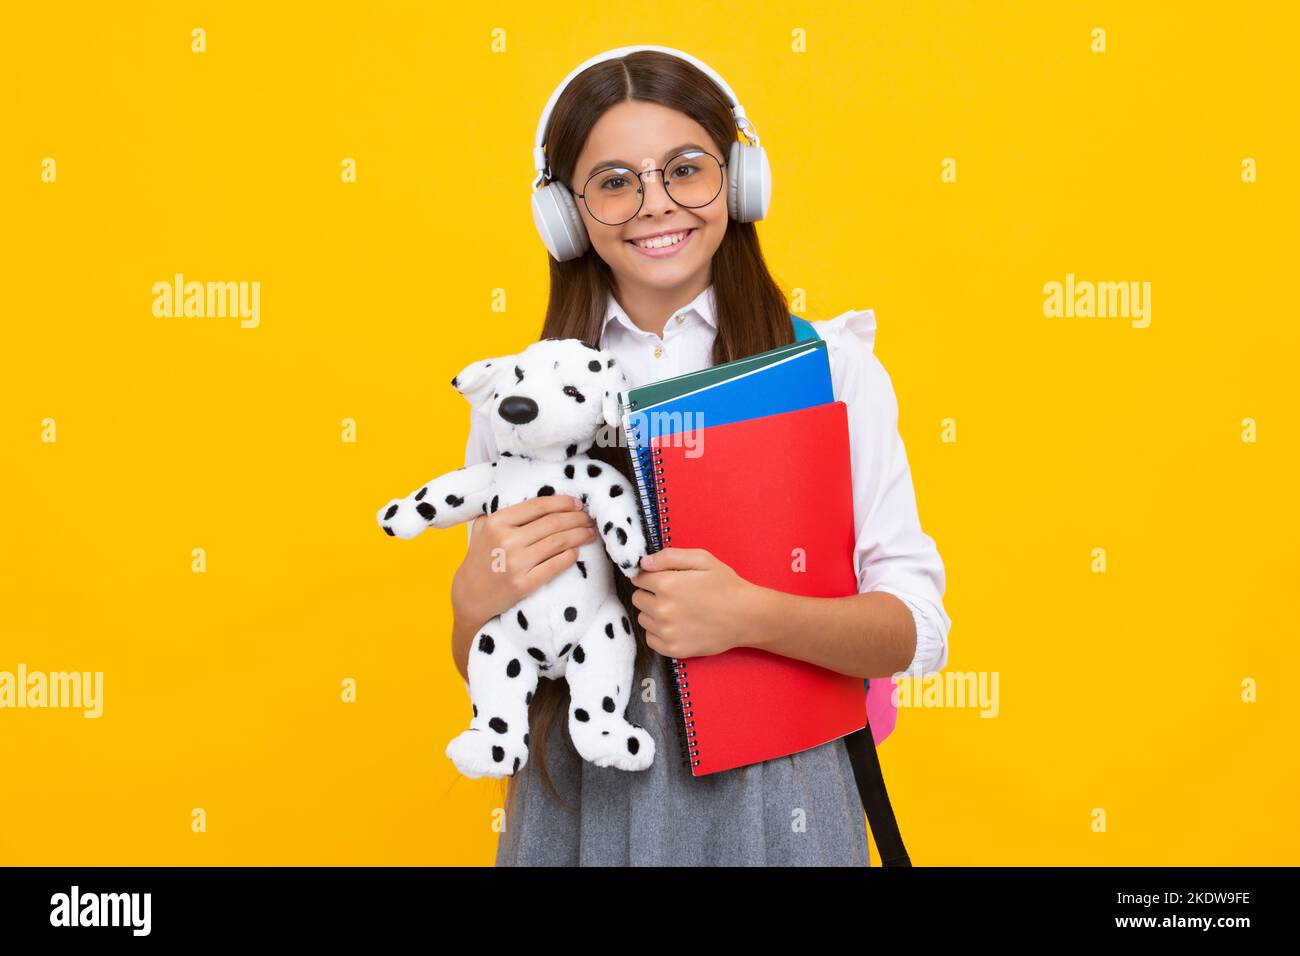 Schoolgirl 12, 13, 14 years old with toy. School children cuddling favorite toys on yellow background. Happy childhood. Happy girl face, positive and Stock Photo